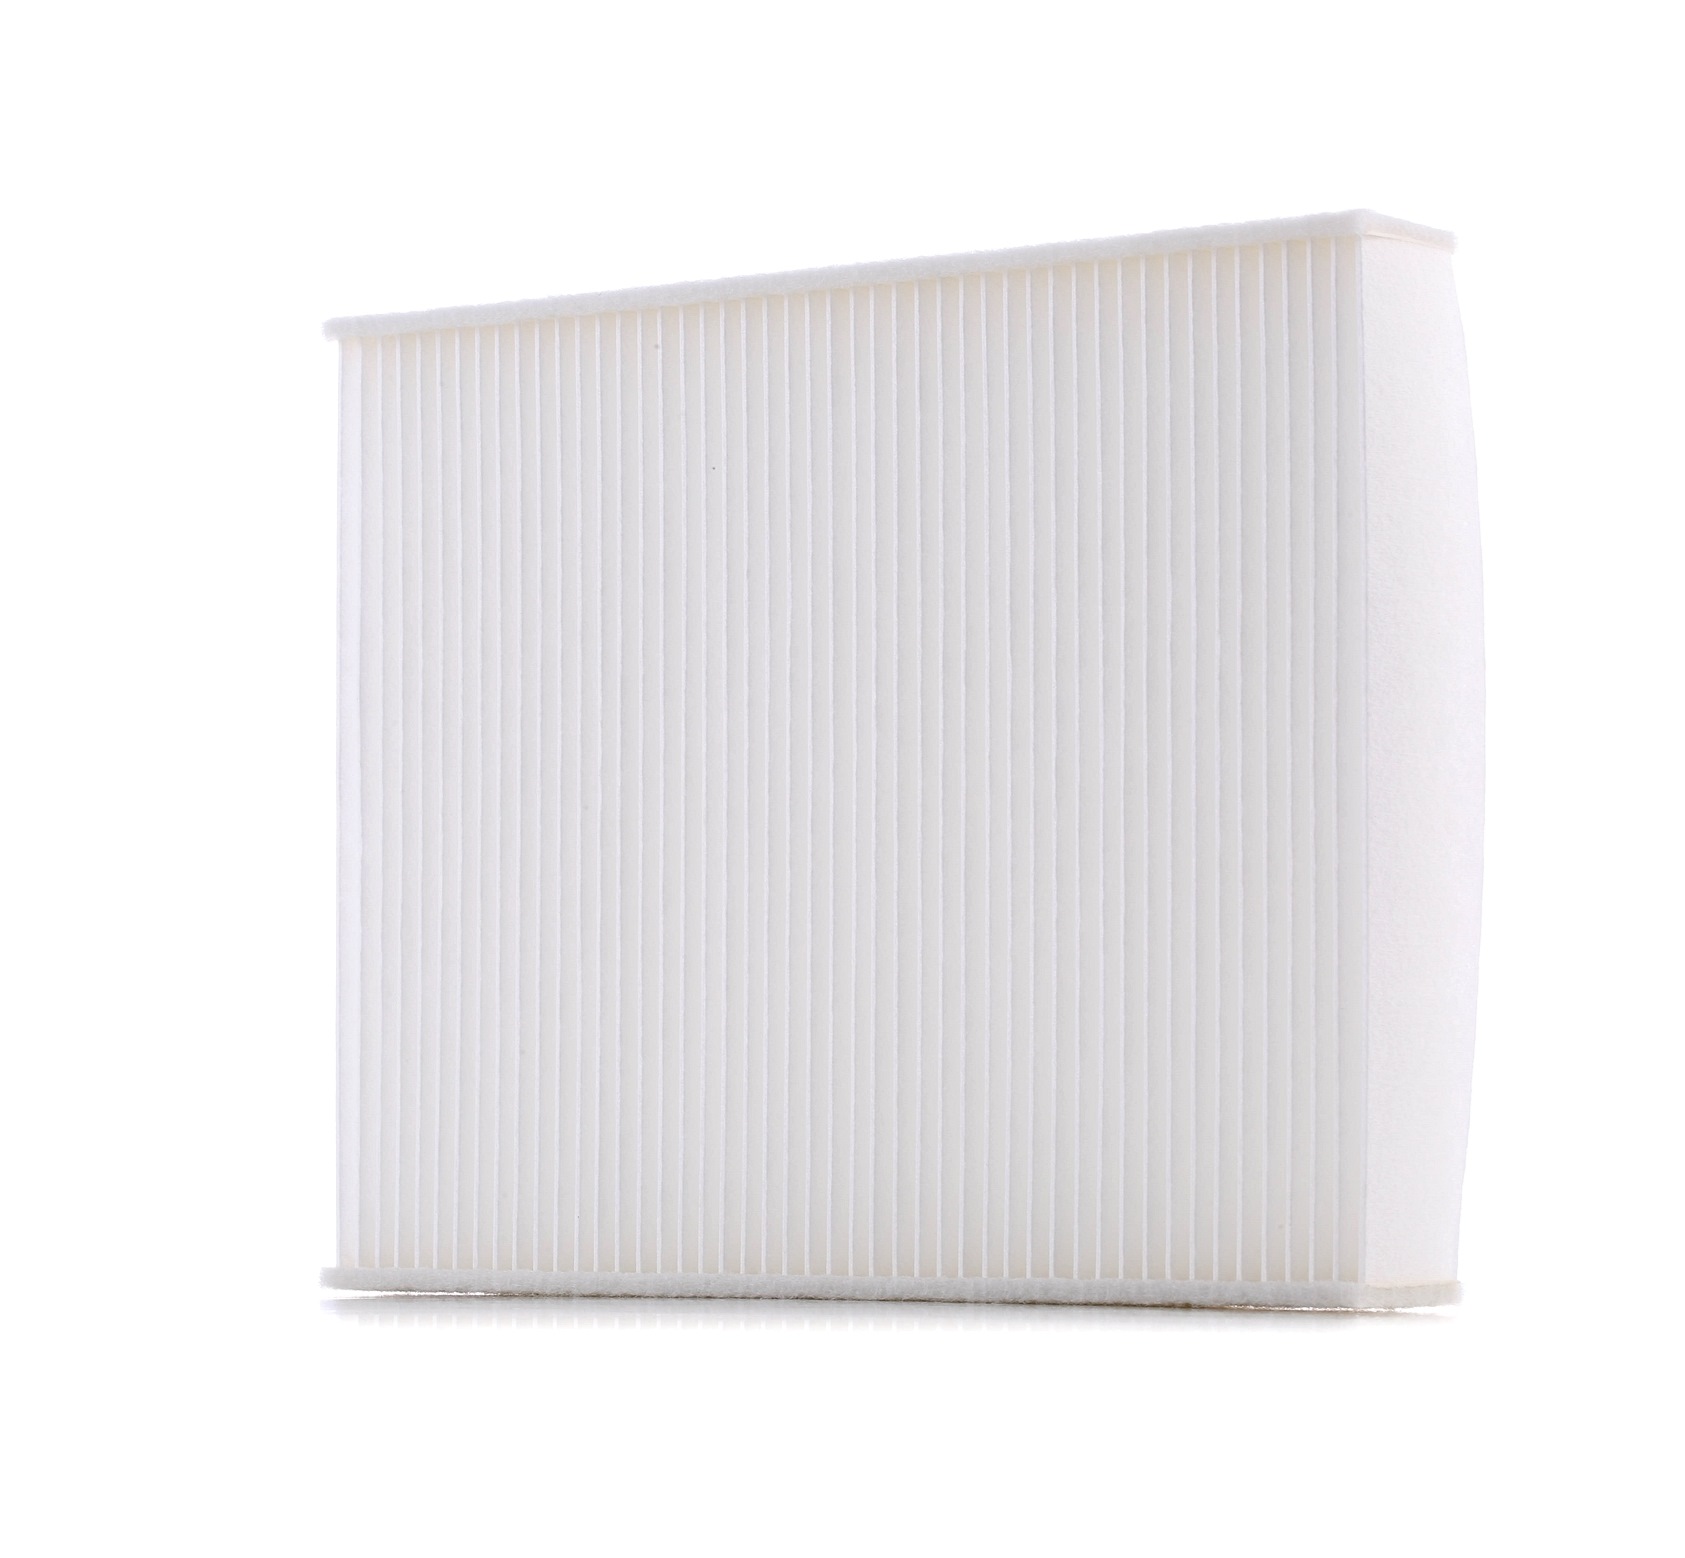 PURRO Activated Carbon Filter, 239 mm x 190 mm x 34 mm Width: 190mm, Height: 34mm, Length: 239mm Cabin filter PUR-PC4004 buy